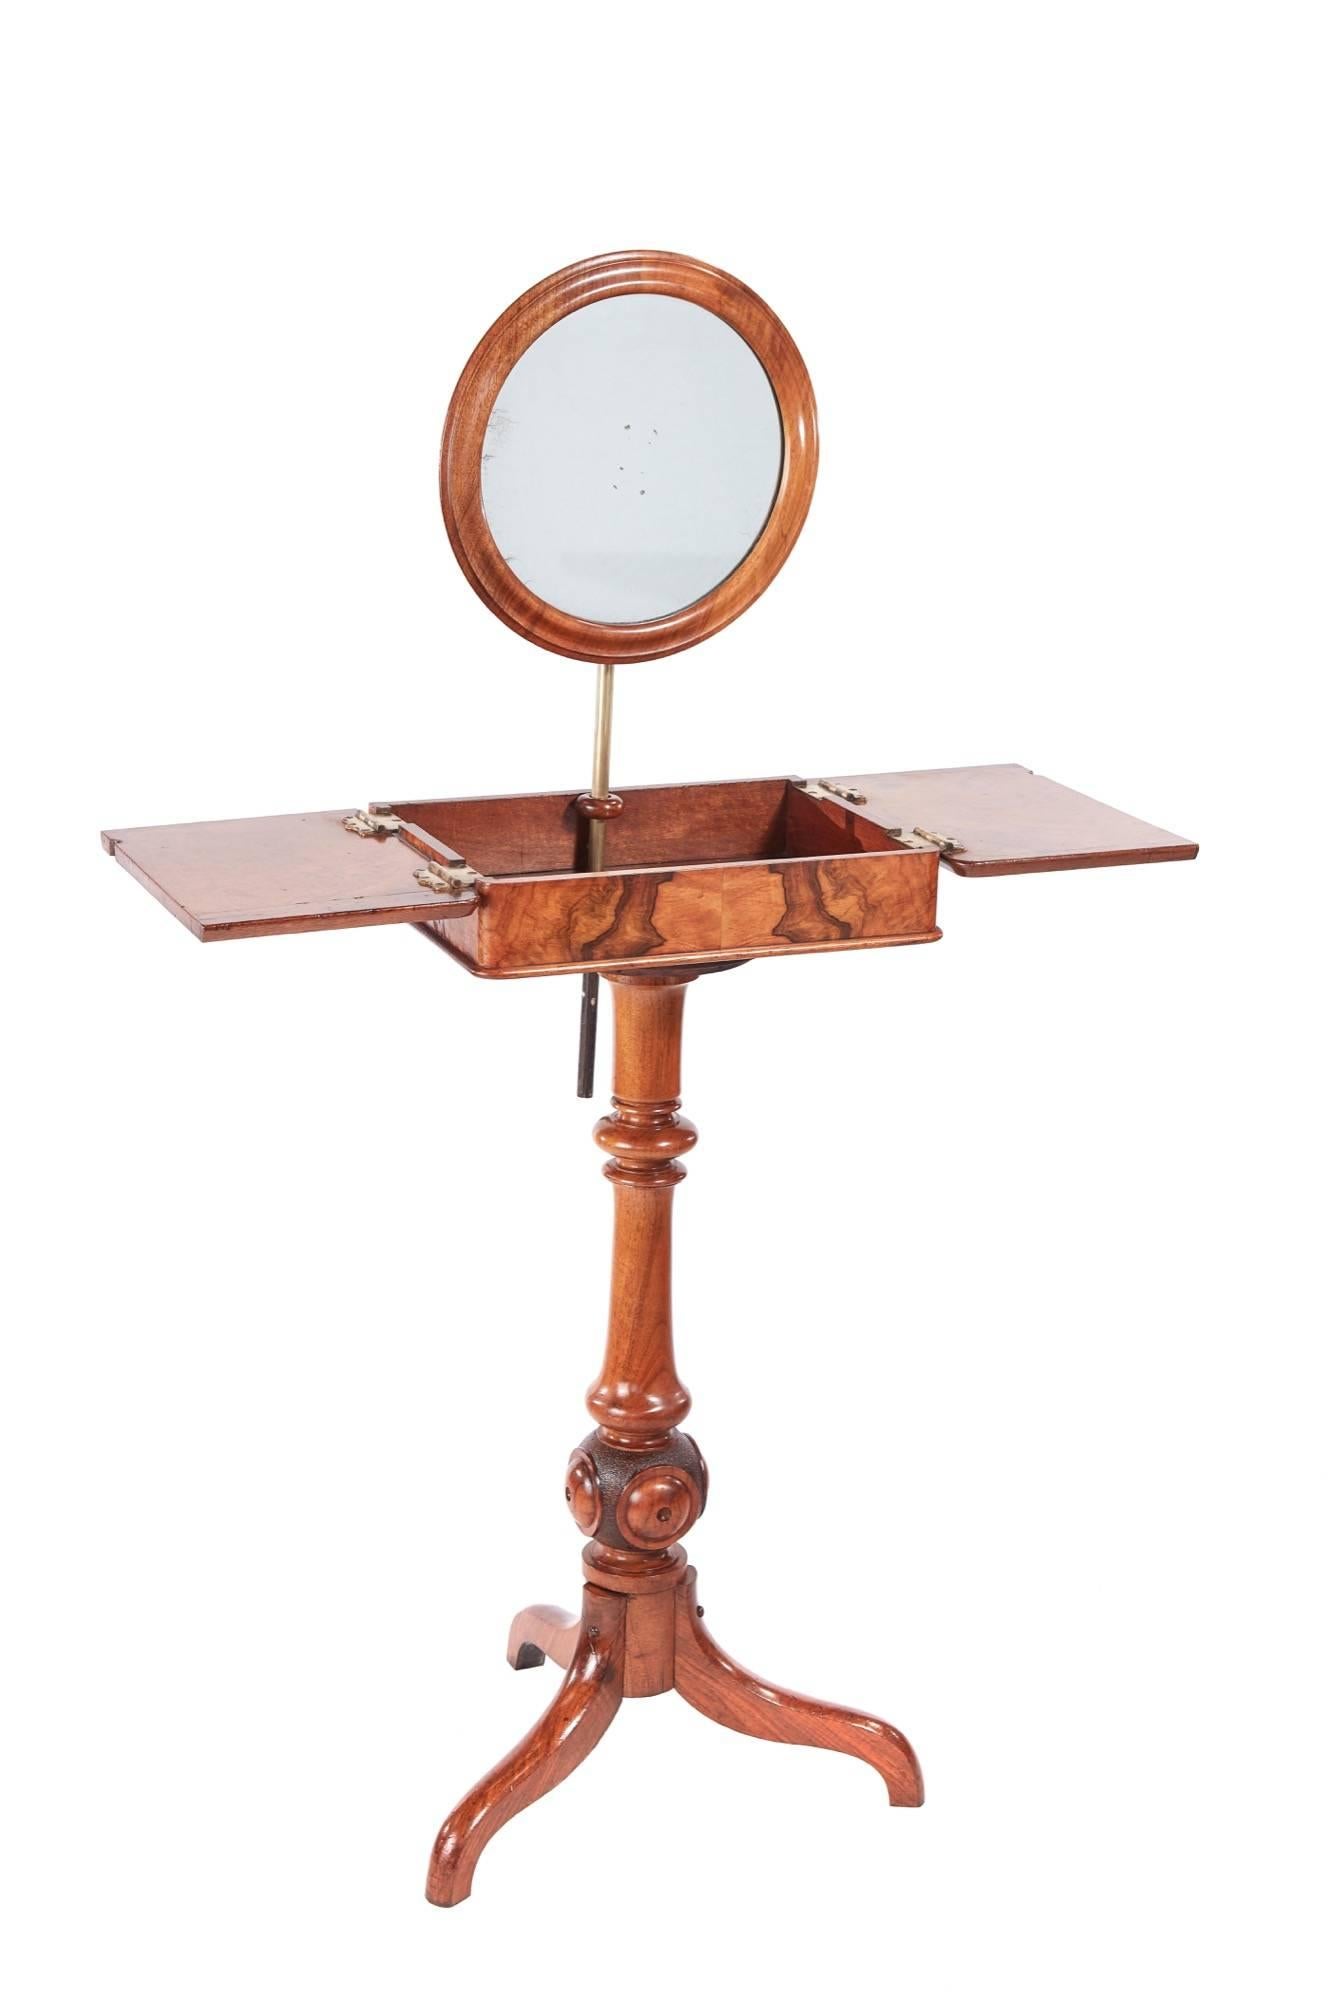 Quality Victorian burr walnut shaving stand, with adjustable circular mirror, fantastic burr walnut rectangular divided hinged top enclosing a compartment, supported on a solid turned carved walnut bulbous pillar on three unusual shaped solid walnut